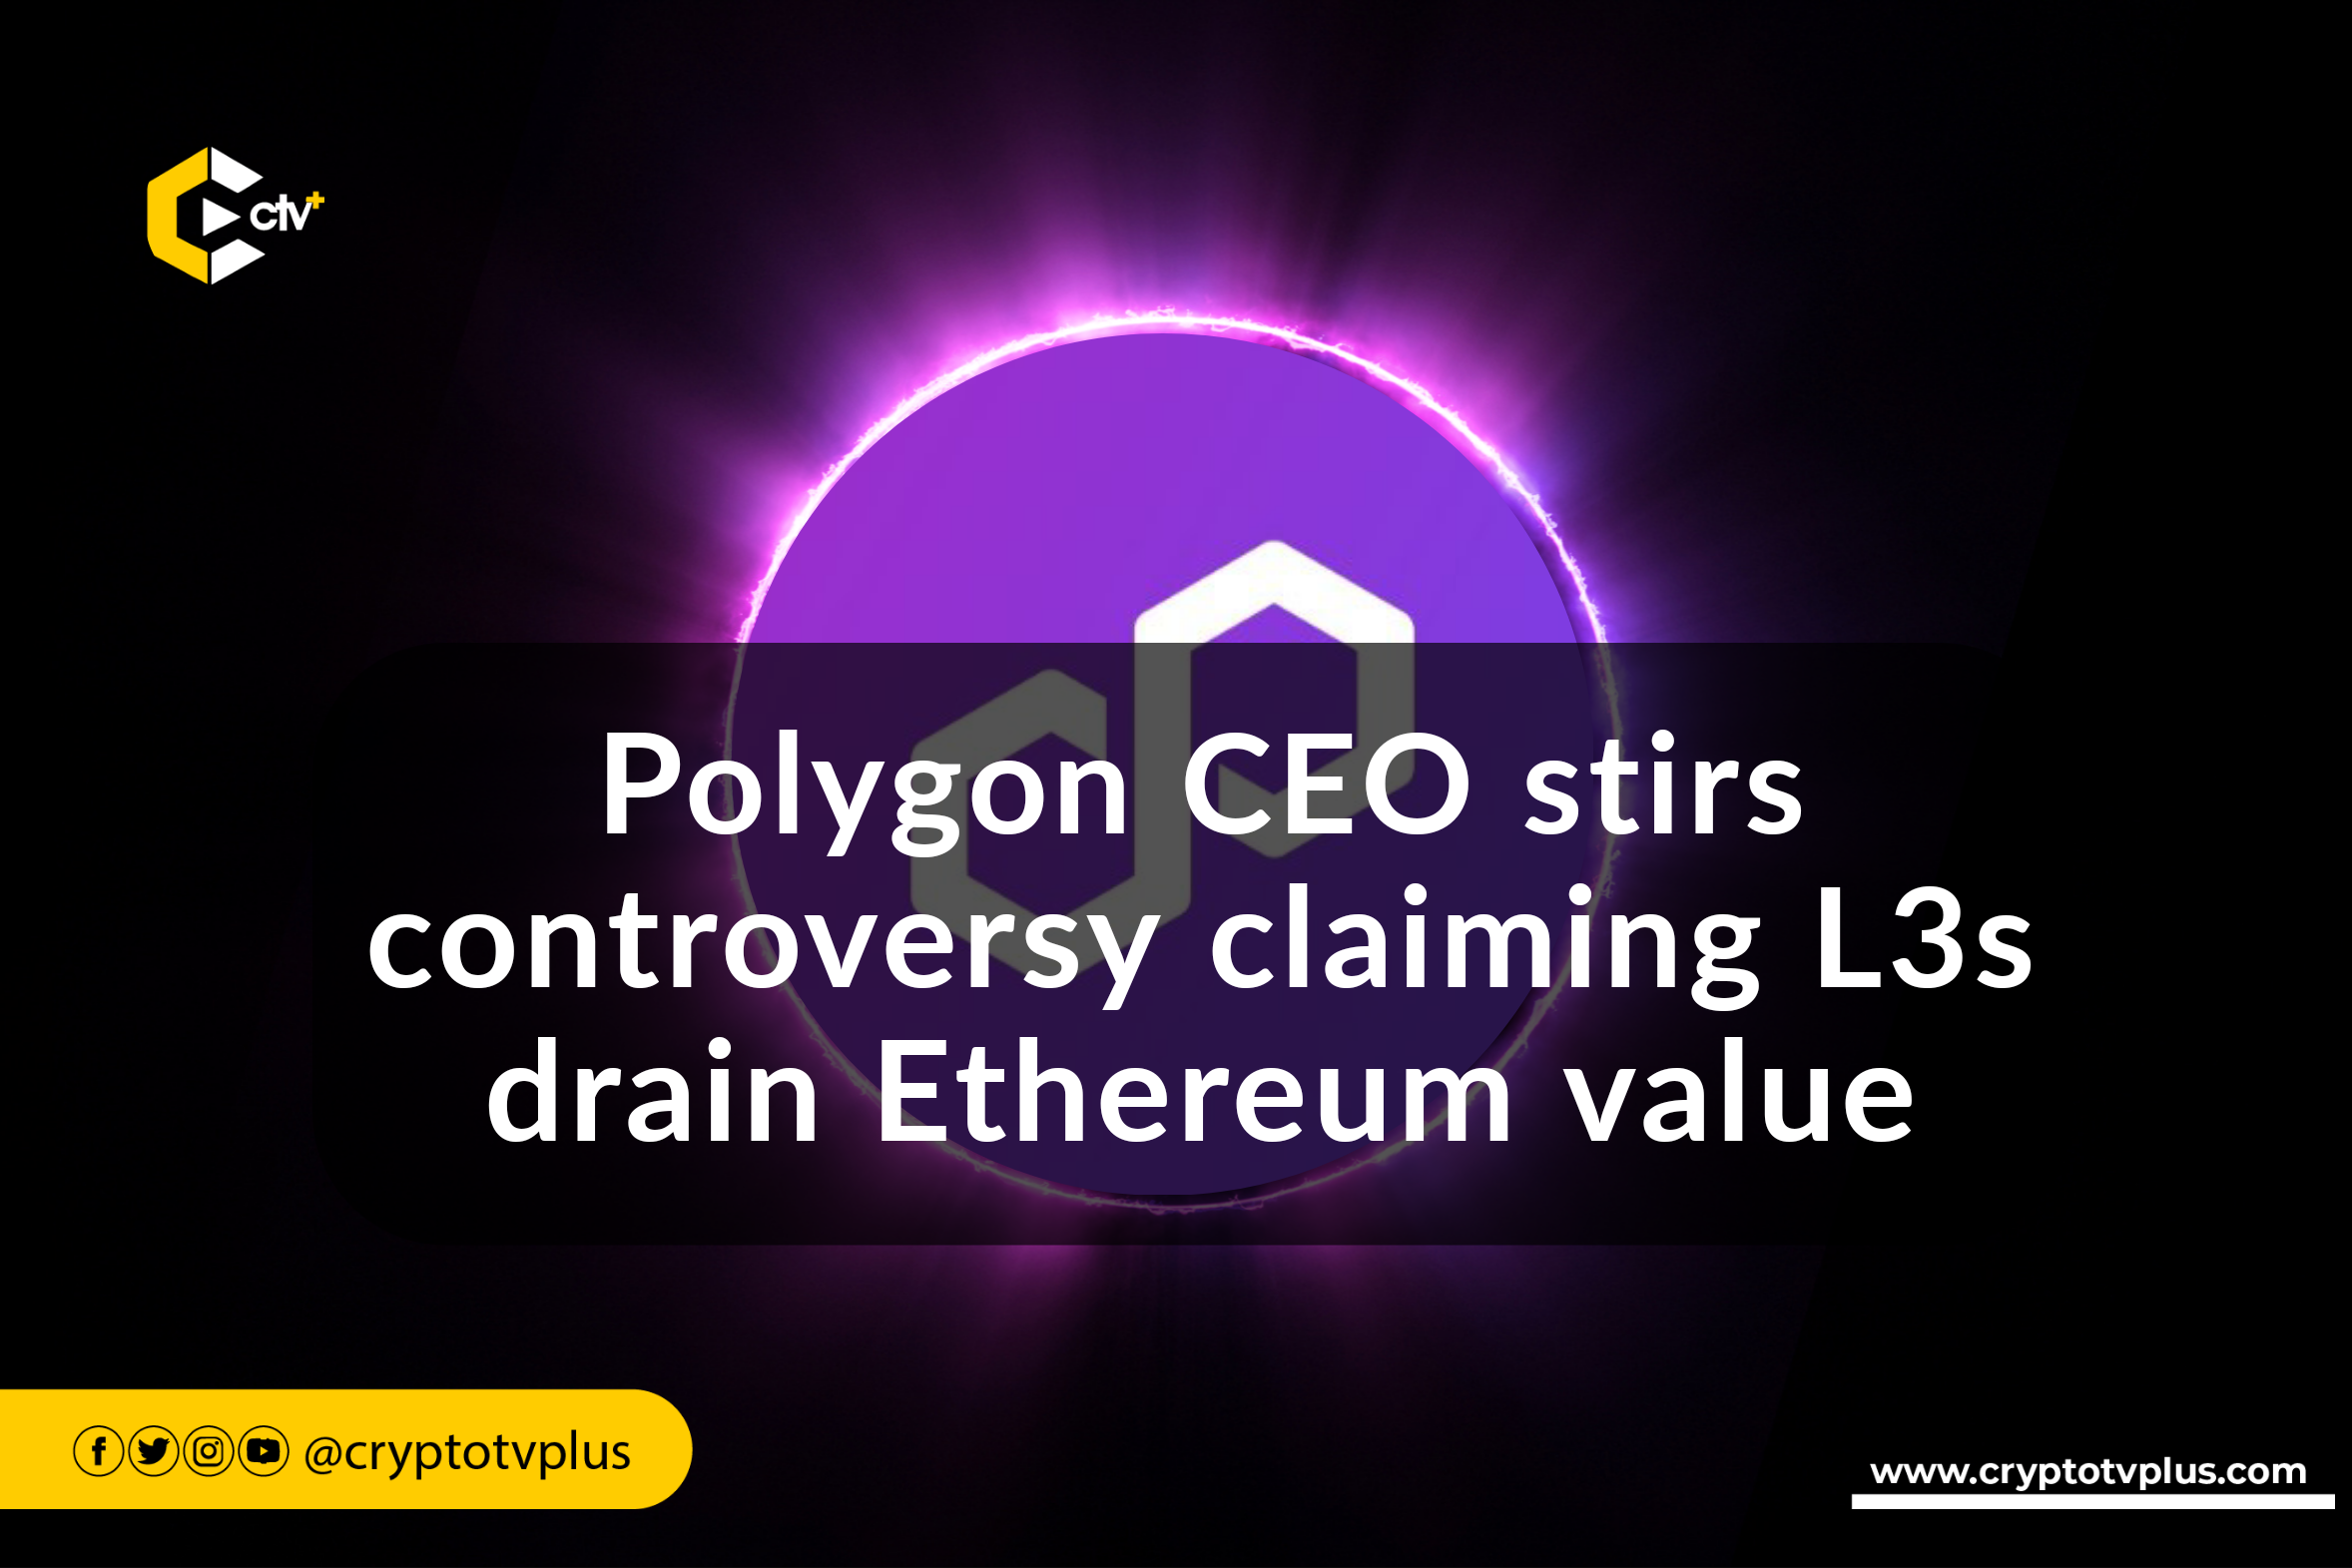 Polygon CEO stirs controversy claiming L3s drain Ethereum value